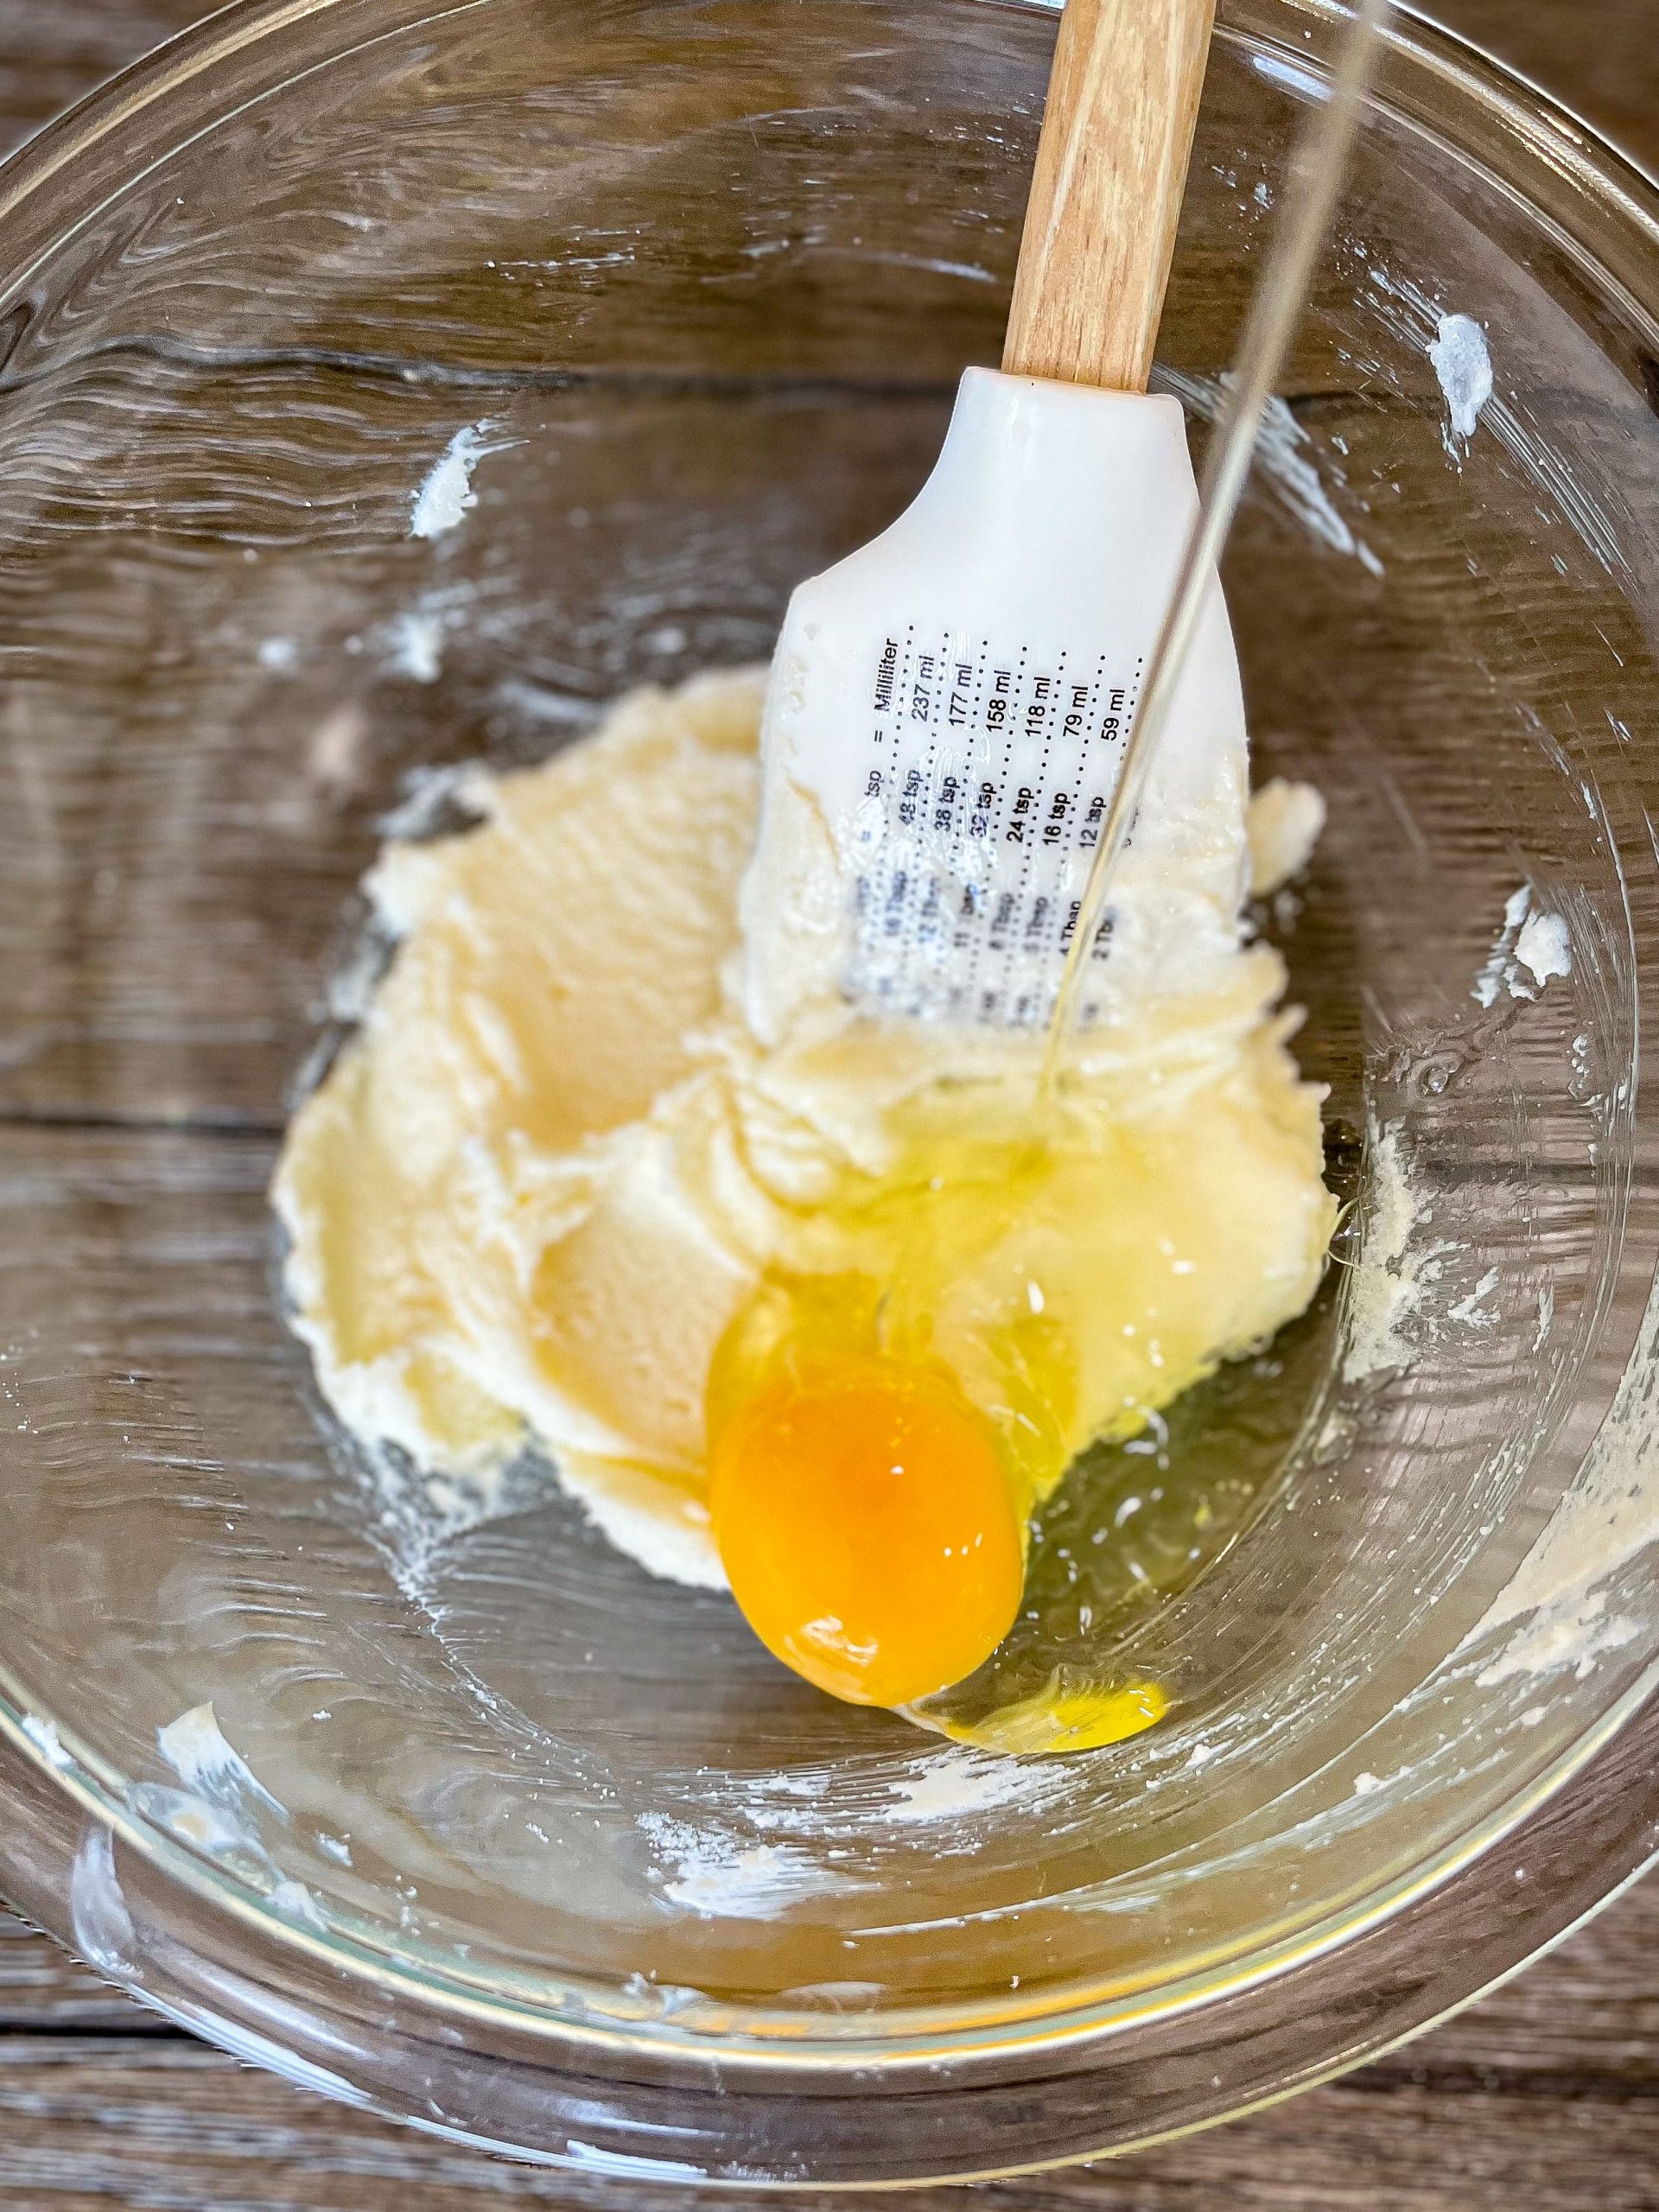 Add the eggs to the bowl with the butter.